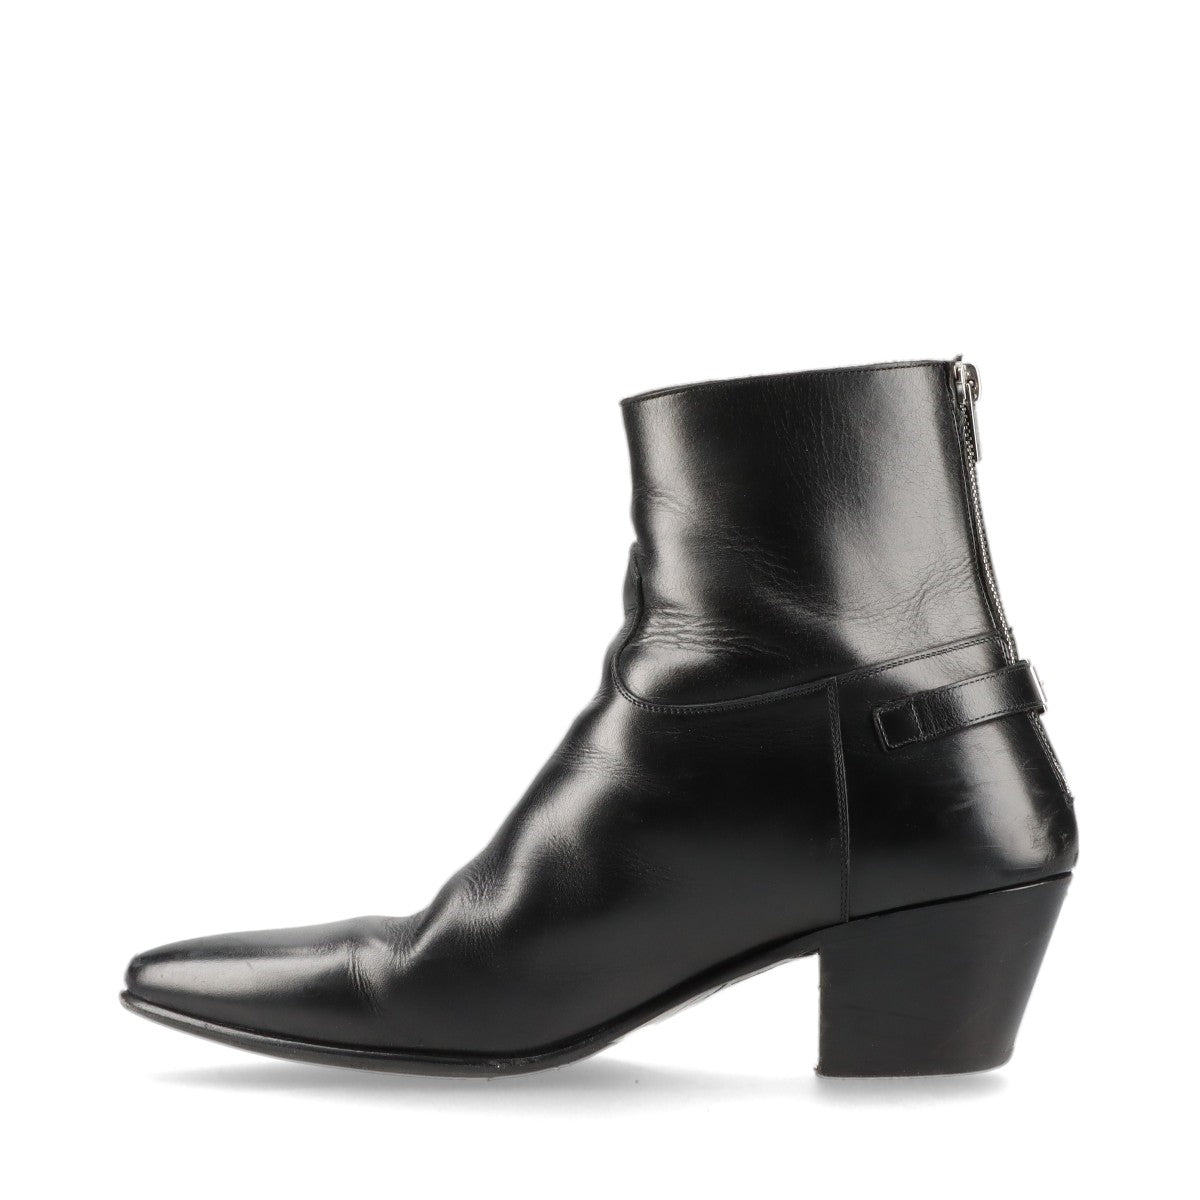 Celine Leather Short Boots EU40 Ladies' Black MG0291 Box There is a bag